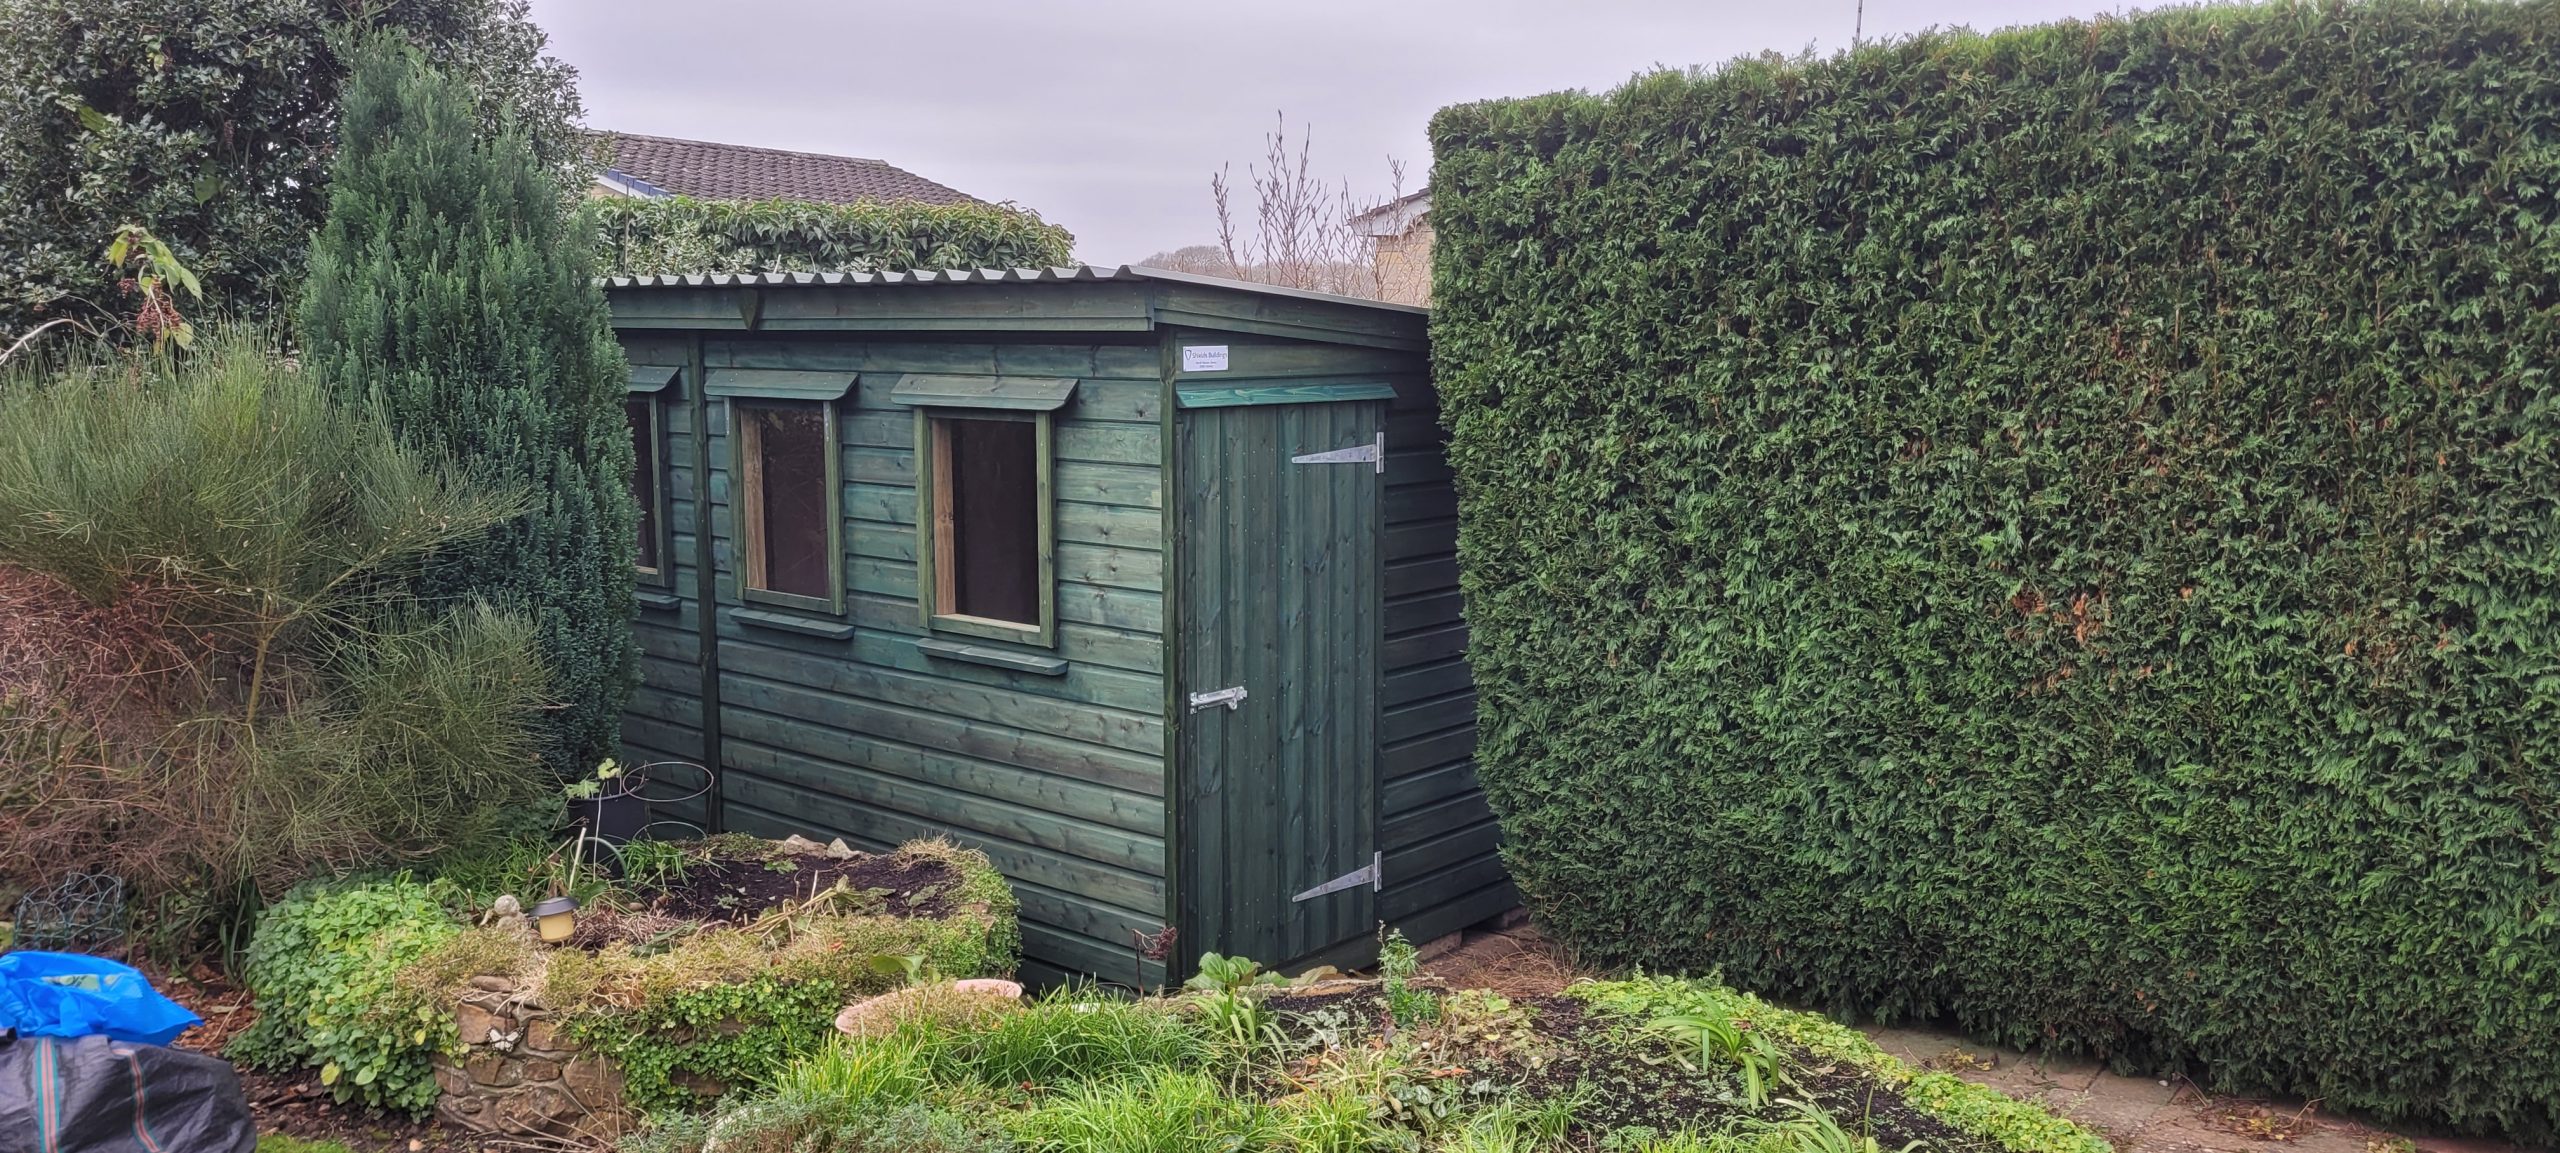 Green painted shed in Devon